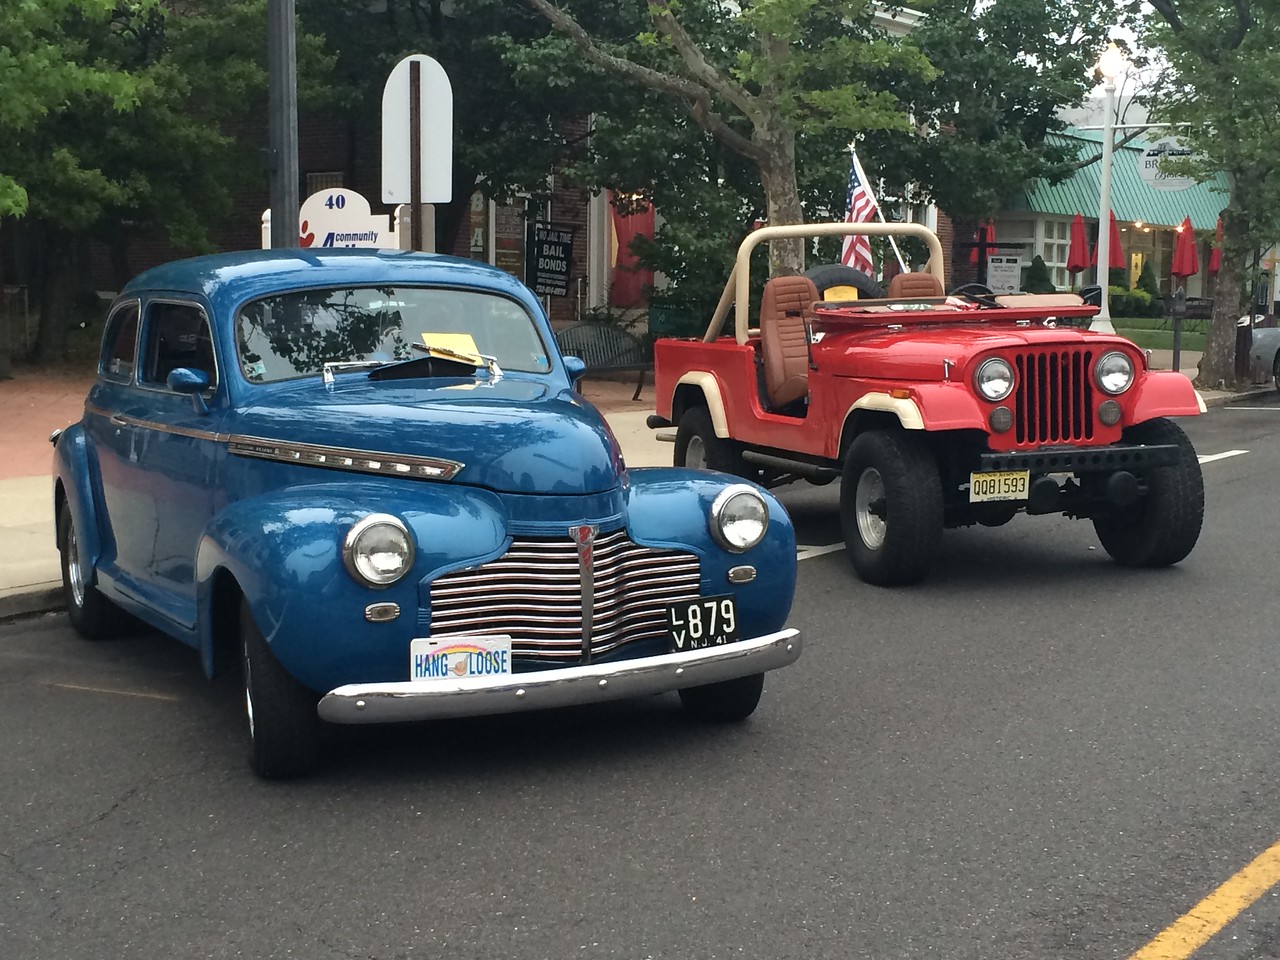 Cruisin' Downtown in Toms River